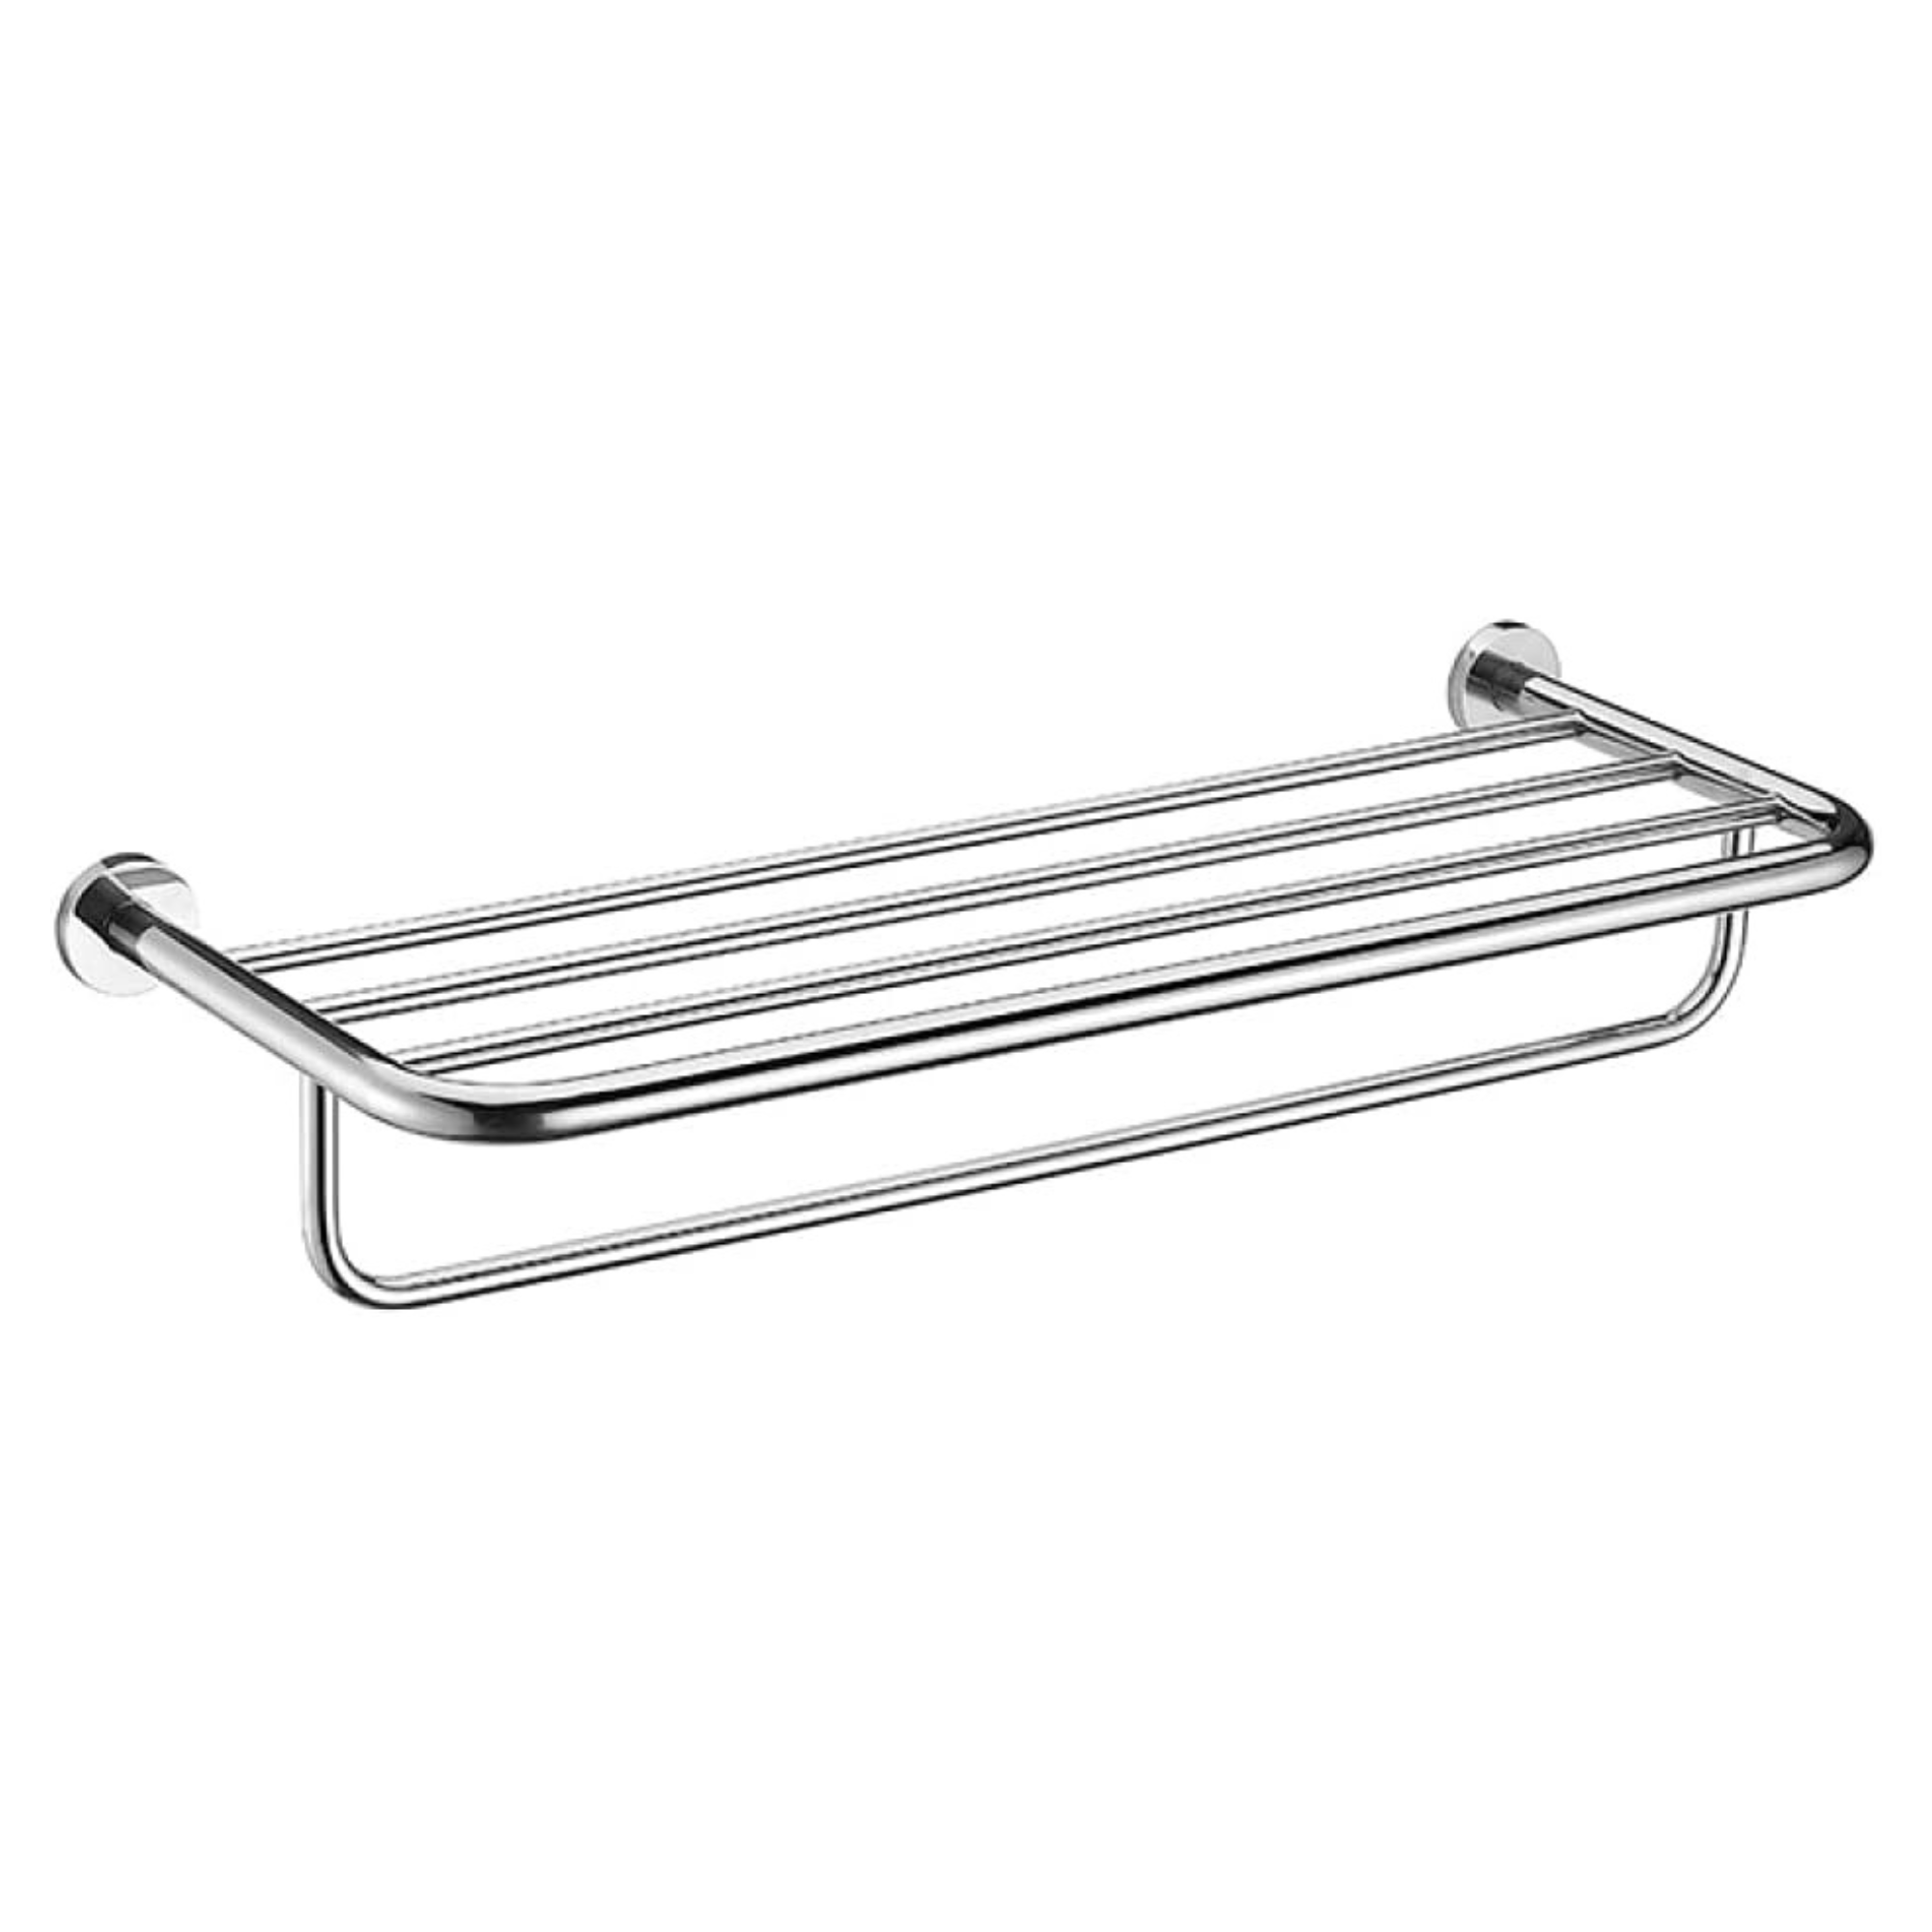 Shop Bathroom Stainless Steel Four Bar Towel Rack - L1022 | Buy at Supply Master Accra, Ghana Bathroom Accessories Buy Tools hardware Building materials